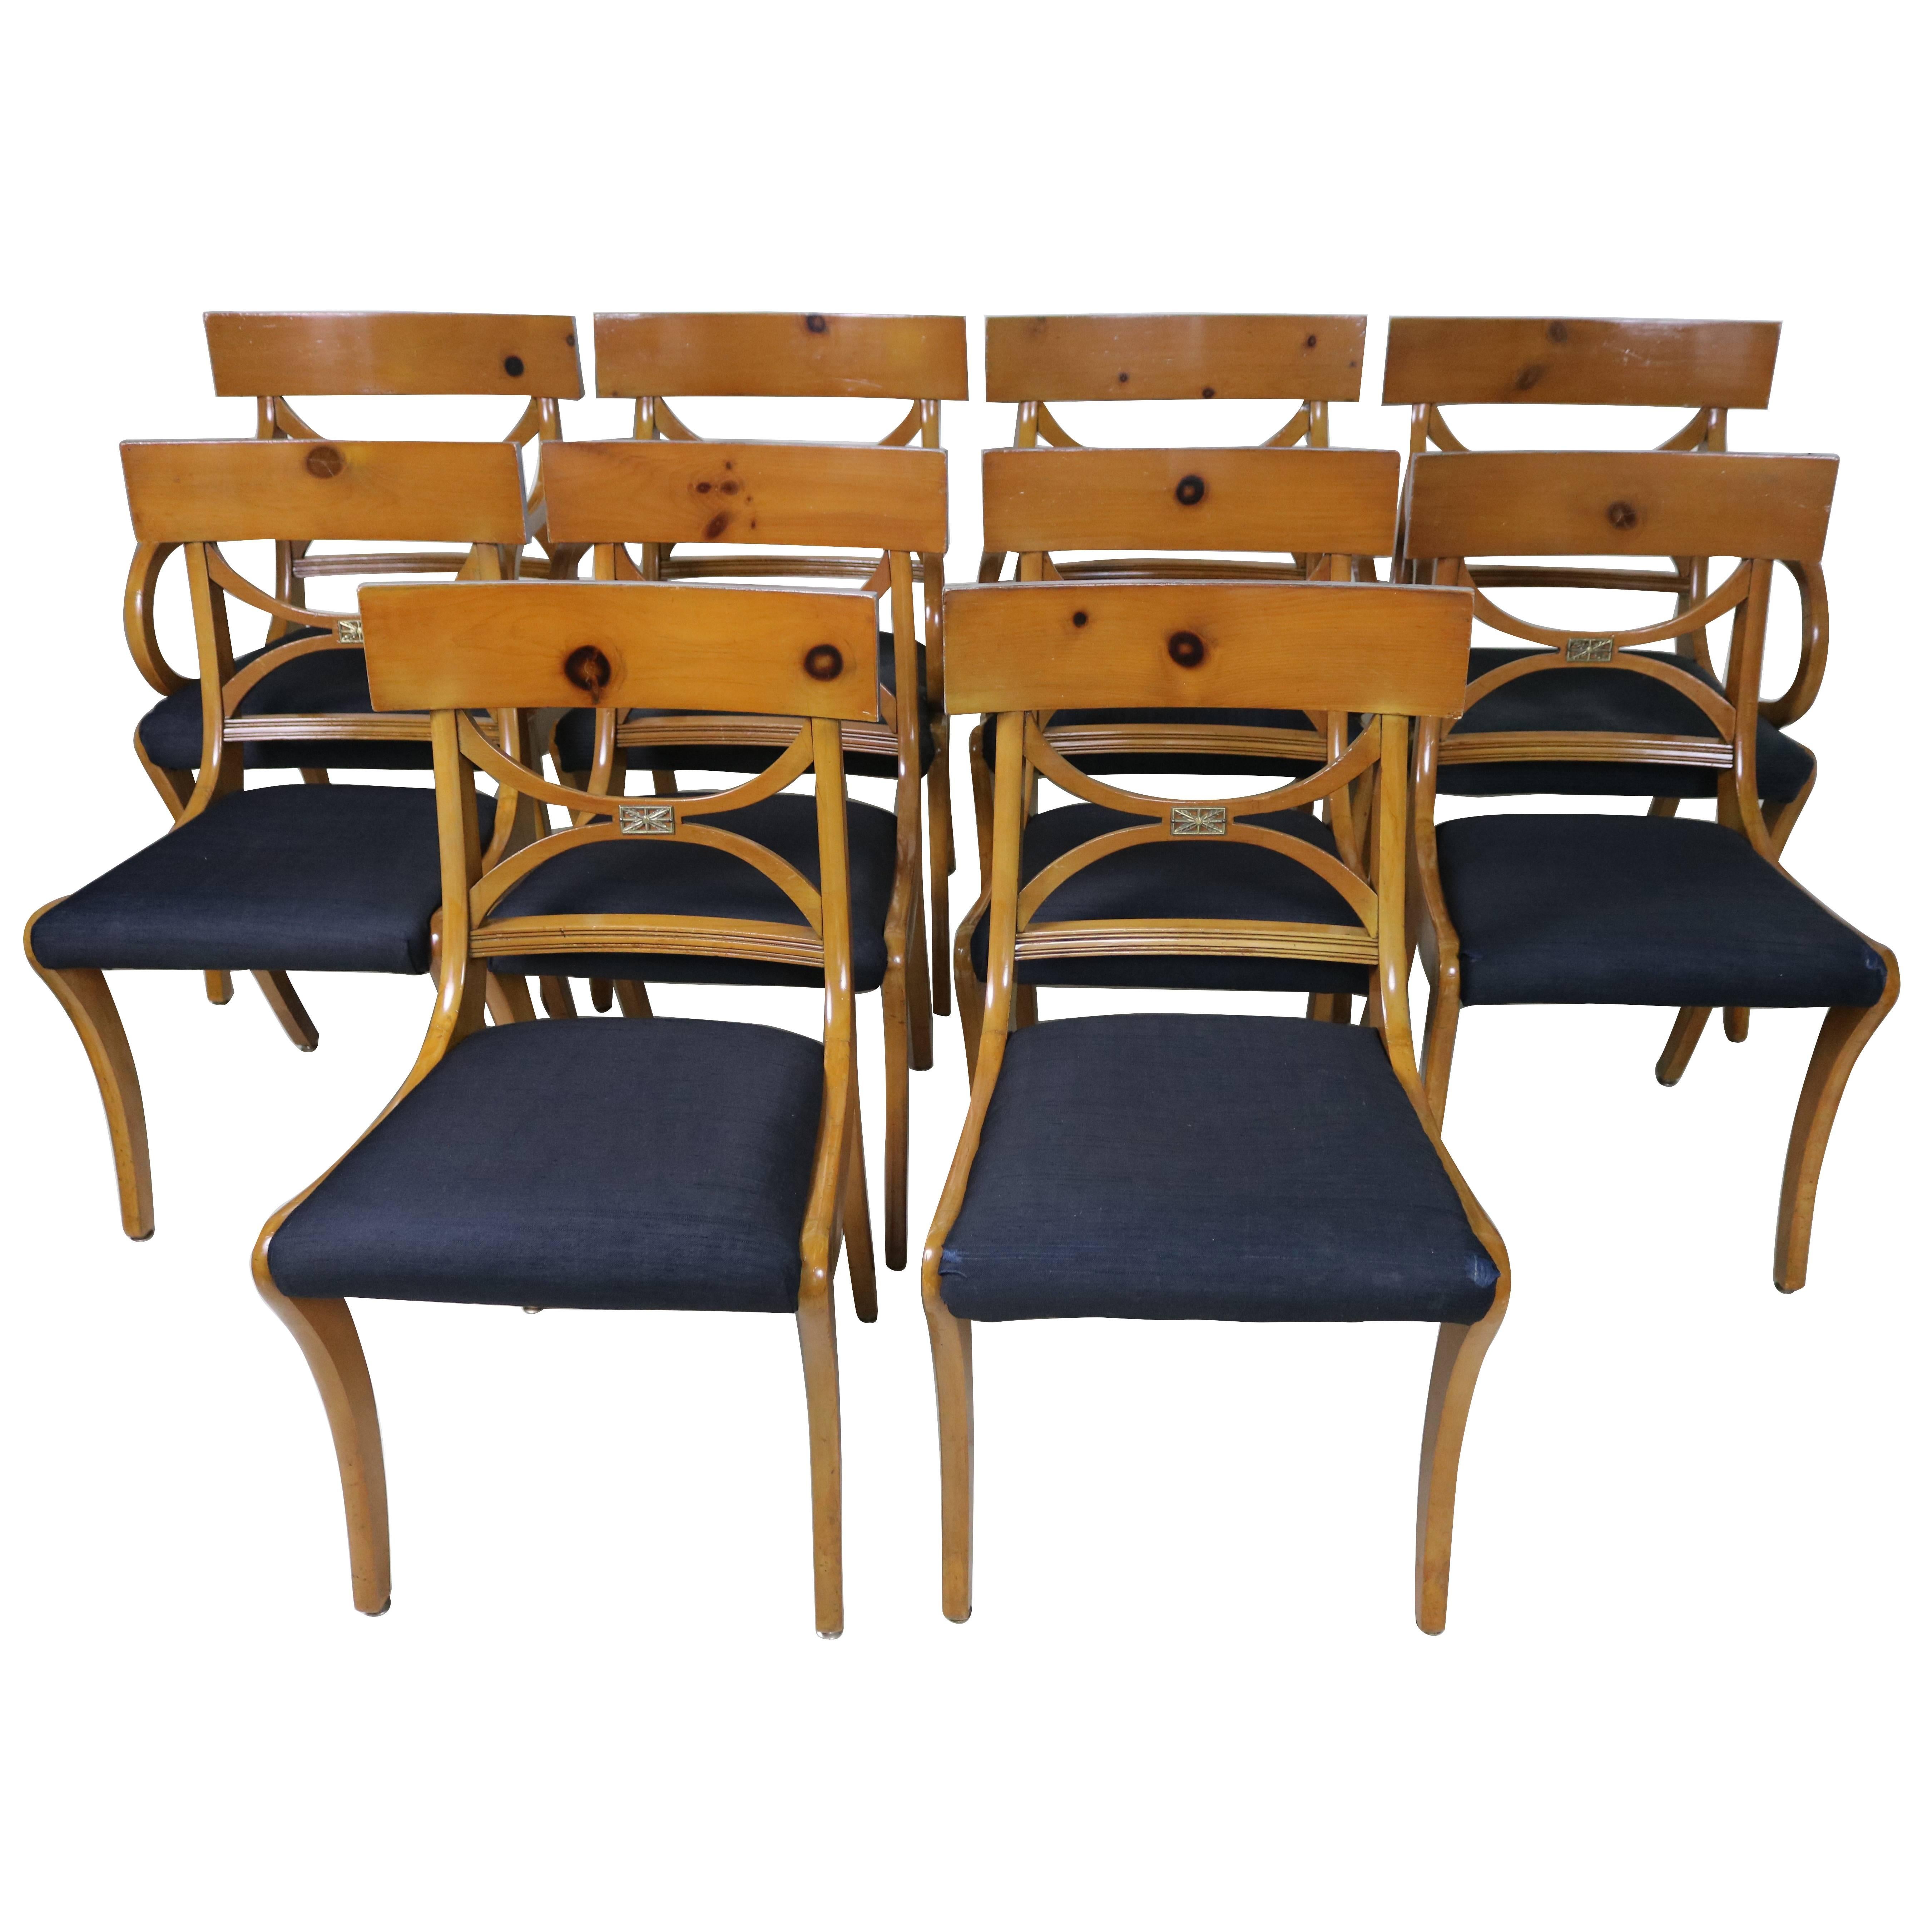 Seating for A Connoisseur!
Spectacular rarely found early 20th century set of ten organic Klismos aged mellow knotty fruitwood dining chairs, newly restored satin lacquered. Elegant lines and high luxe details in the inspired Jacques Emil Ruhlmann